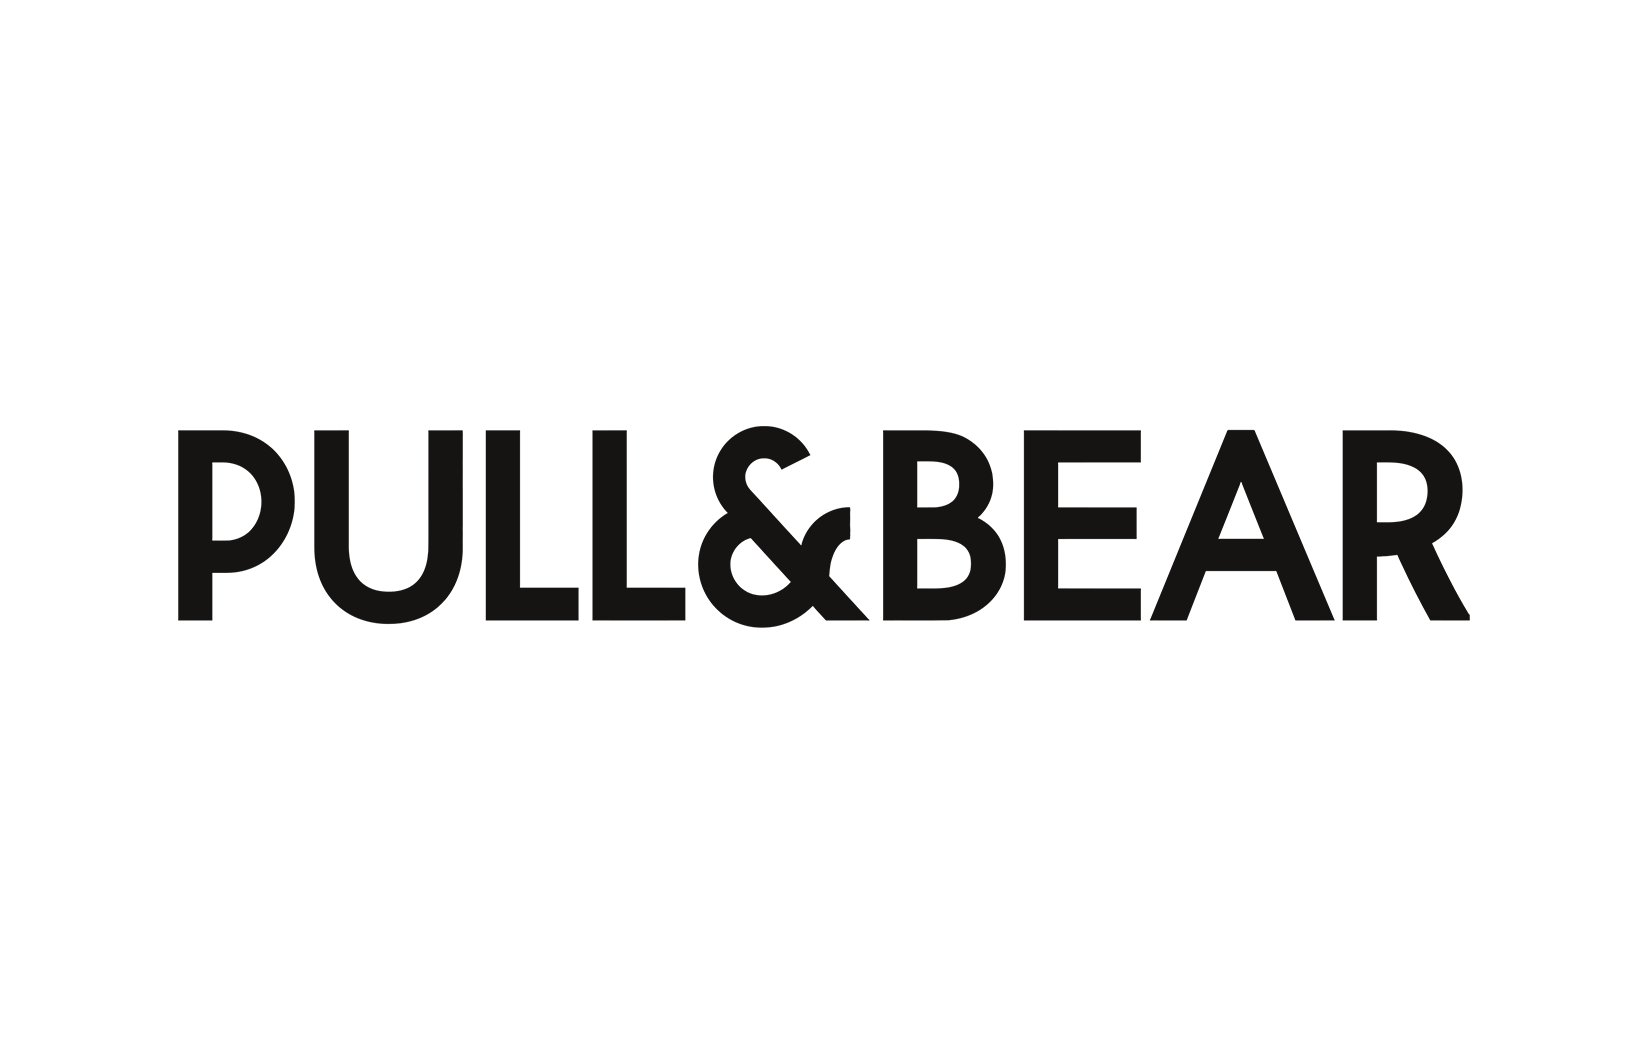 Pull and bear